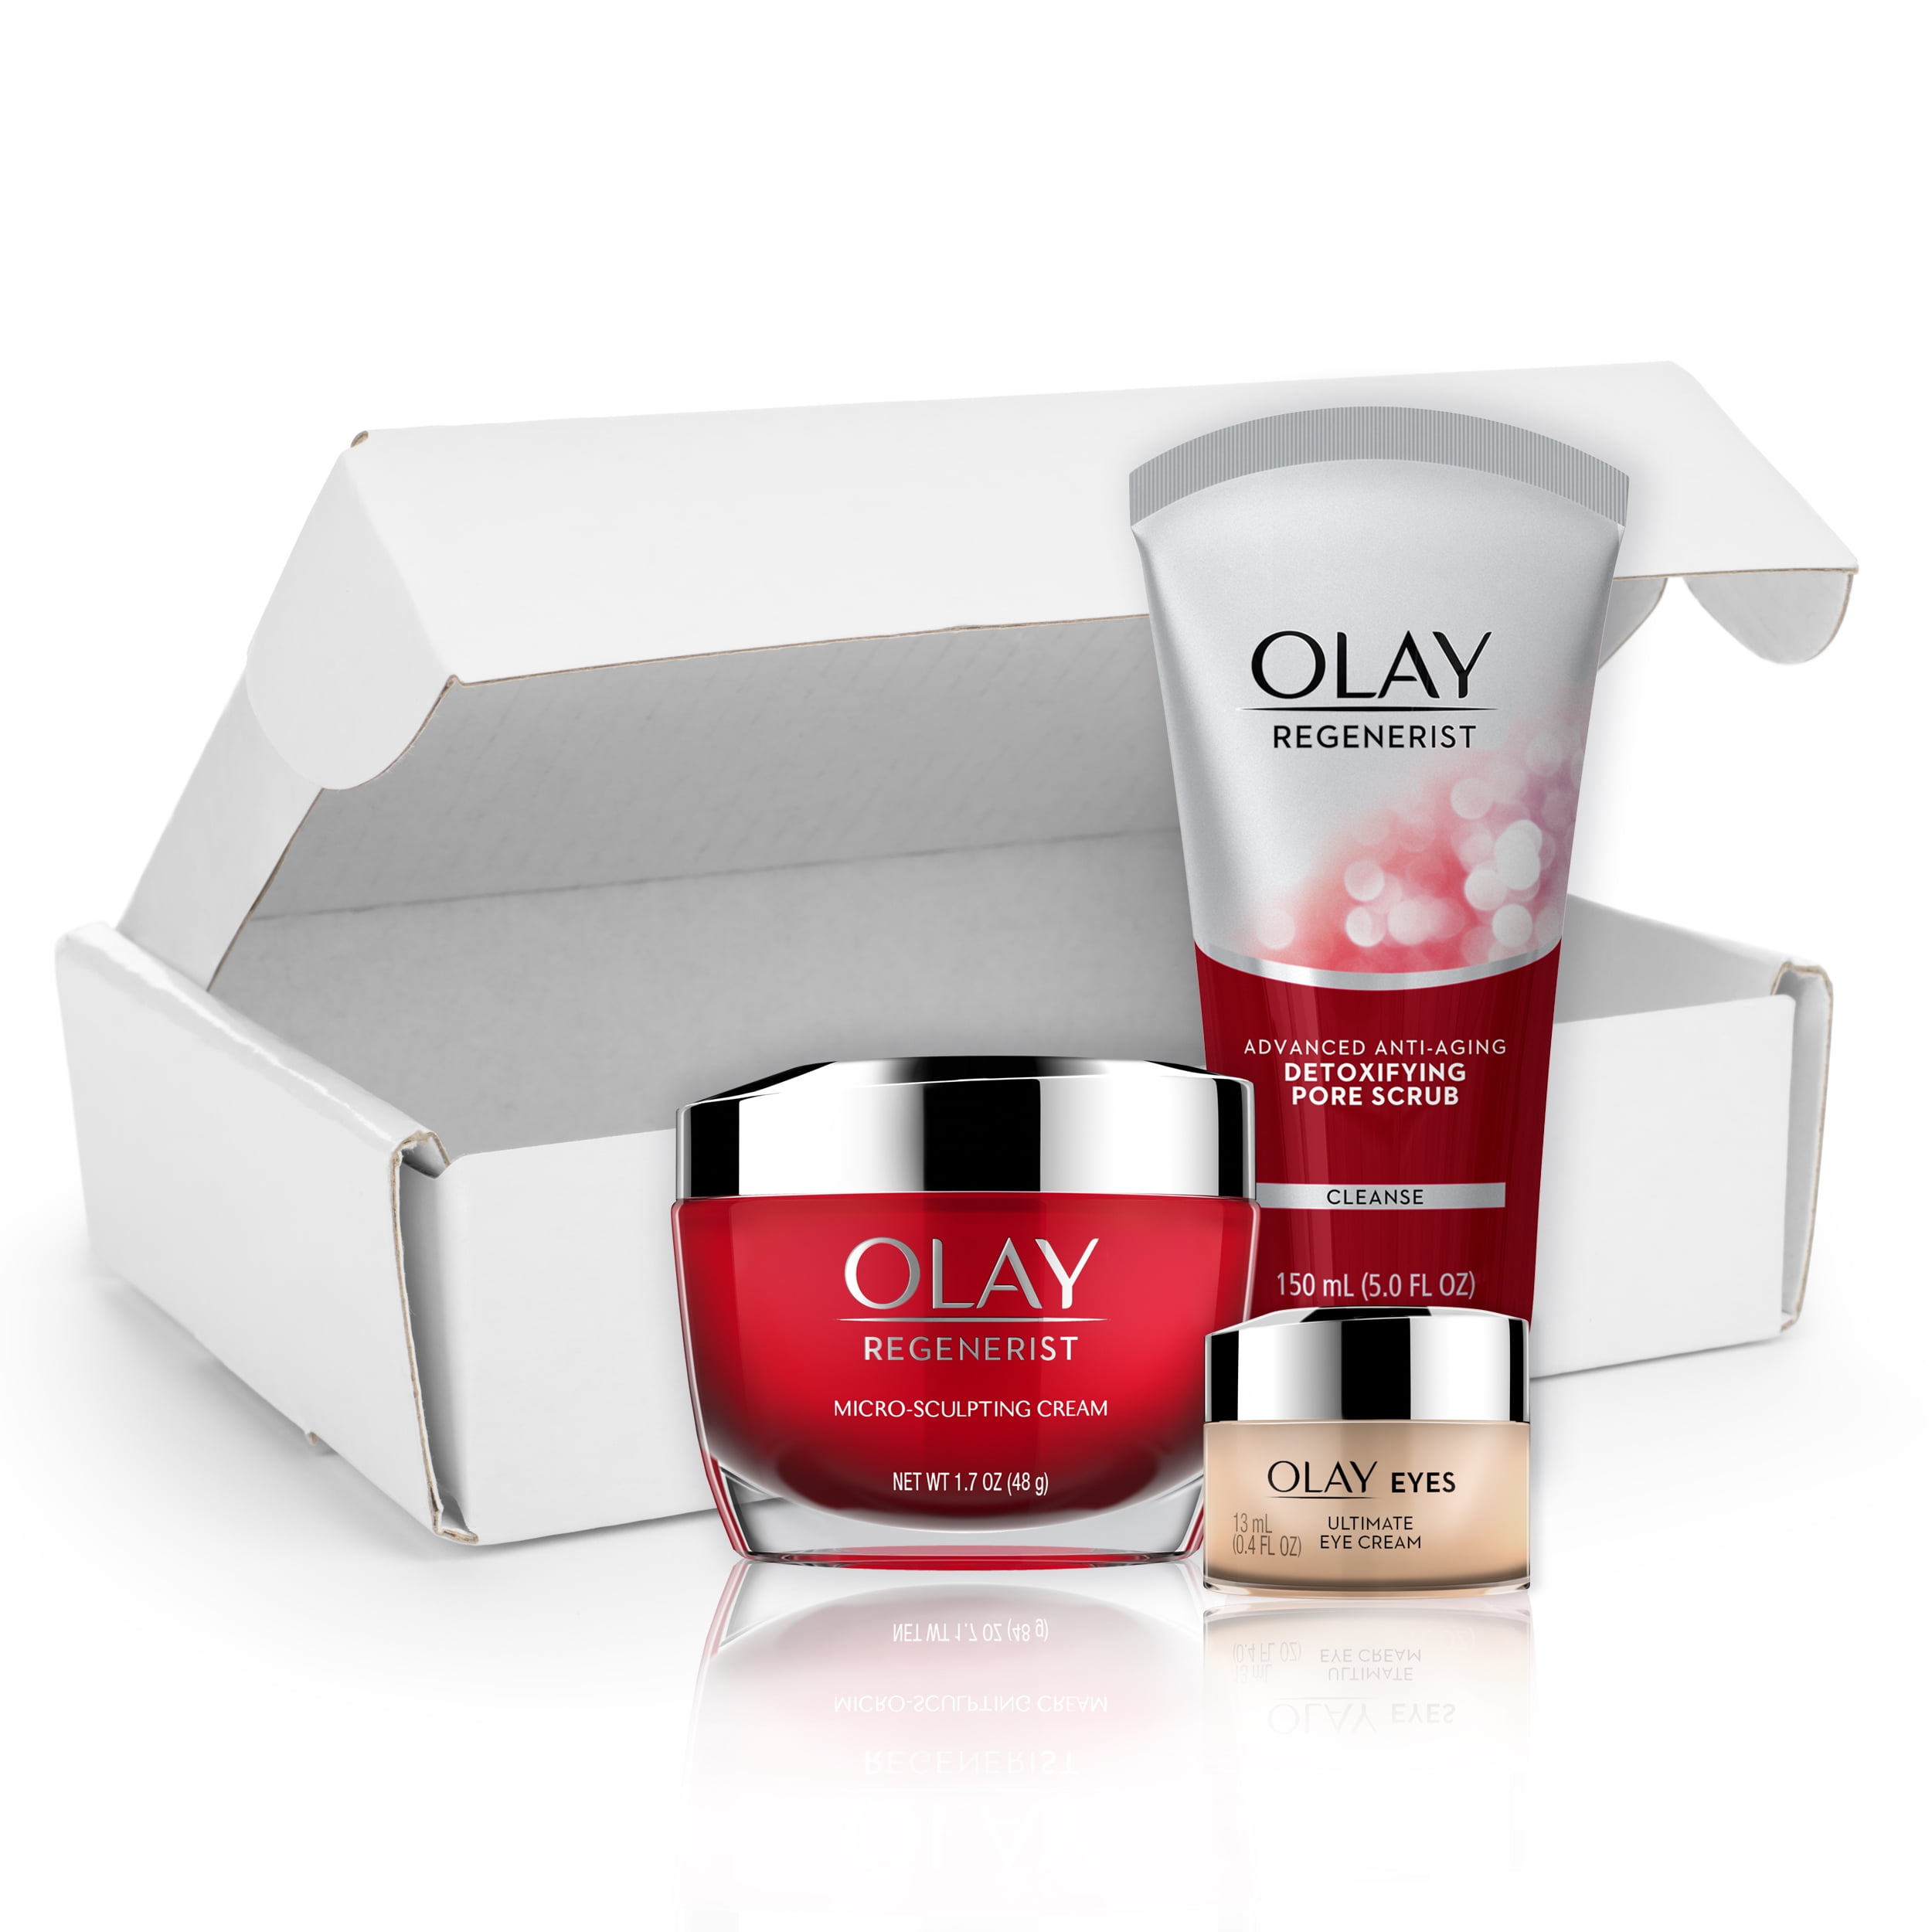 Olay AntiAging Skincare Kit Cleanser, Moisturizer, and